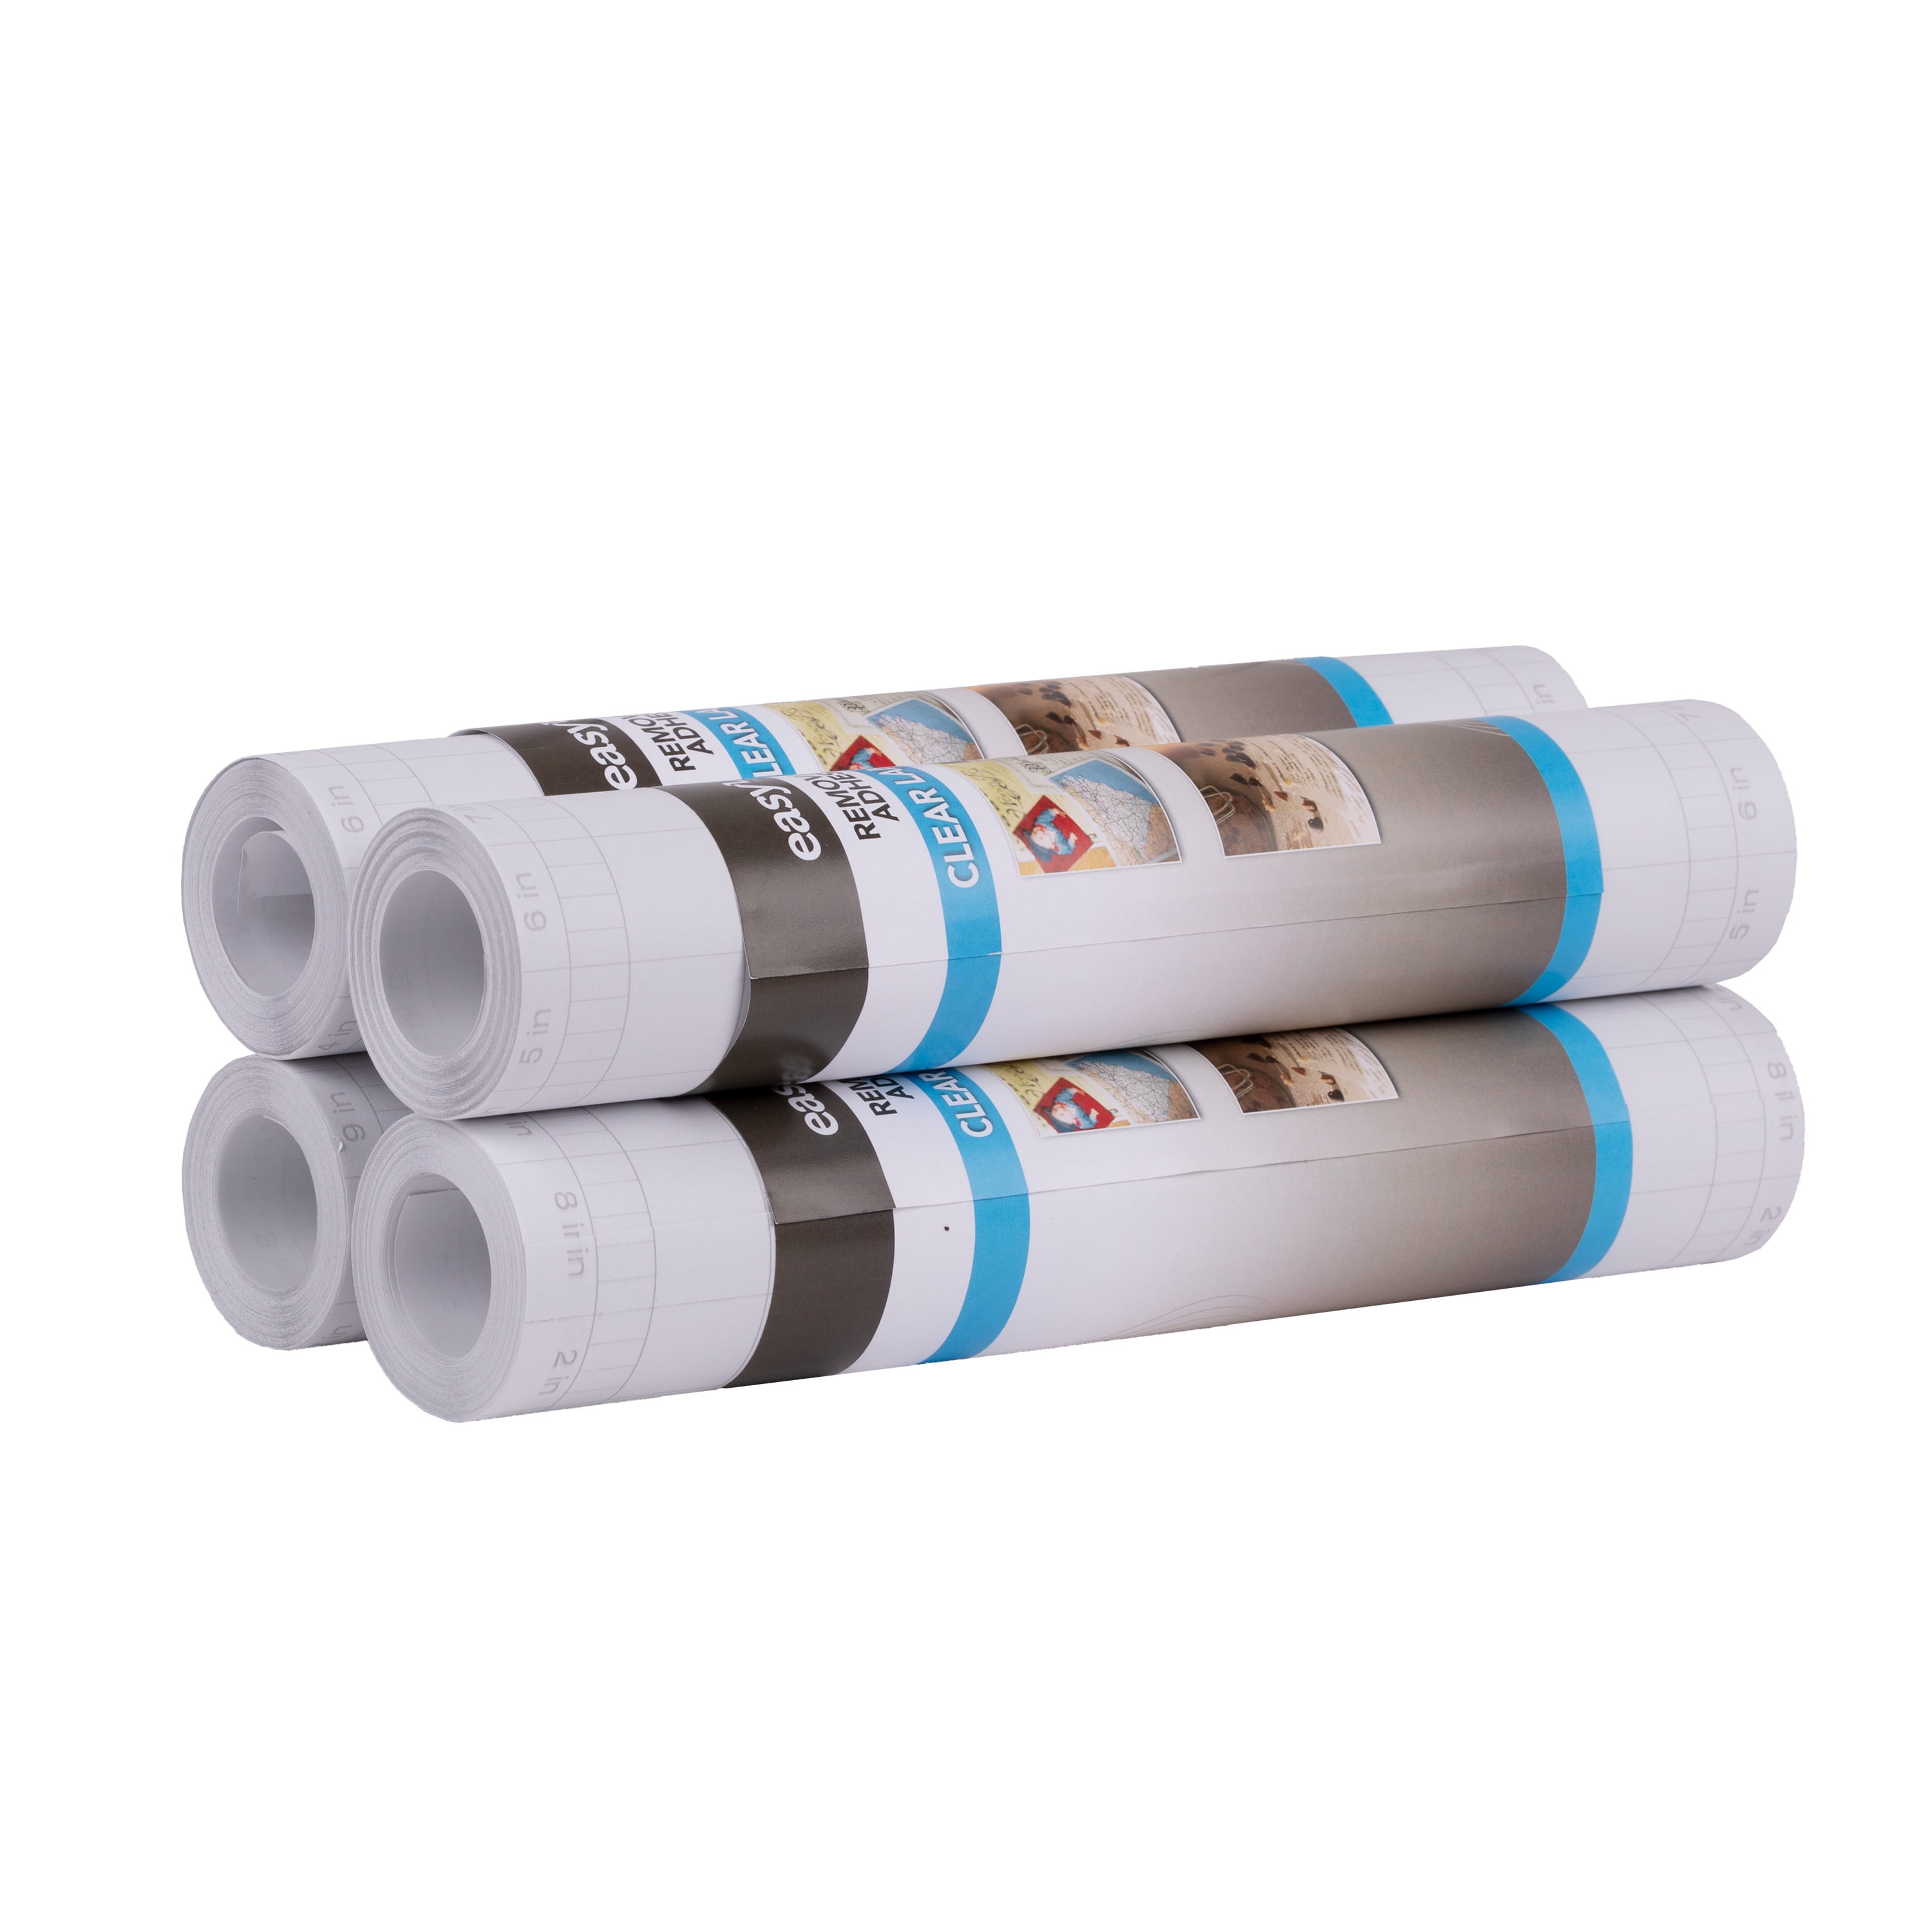 EasyLiner Adhesive Laminate Liner, Clear, 12 in. x 36 ft. Roll 